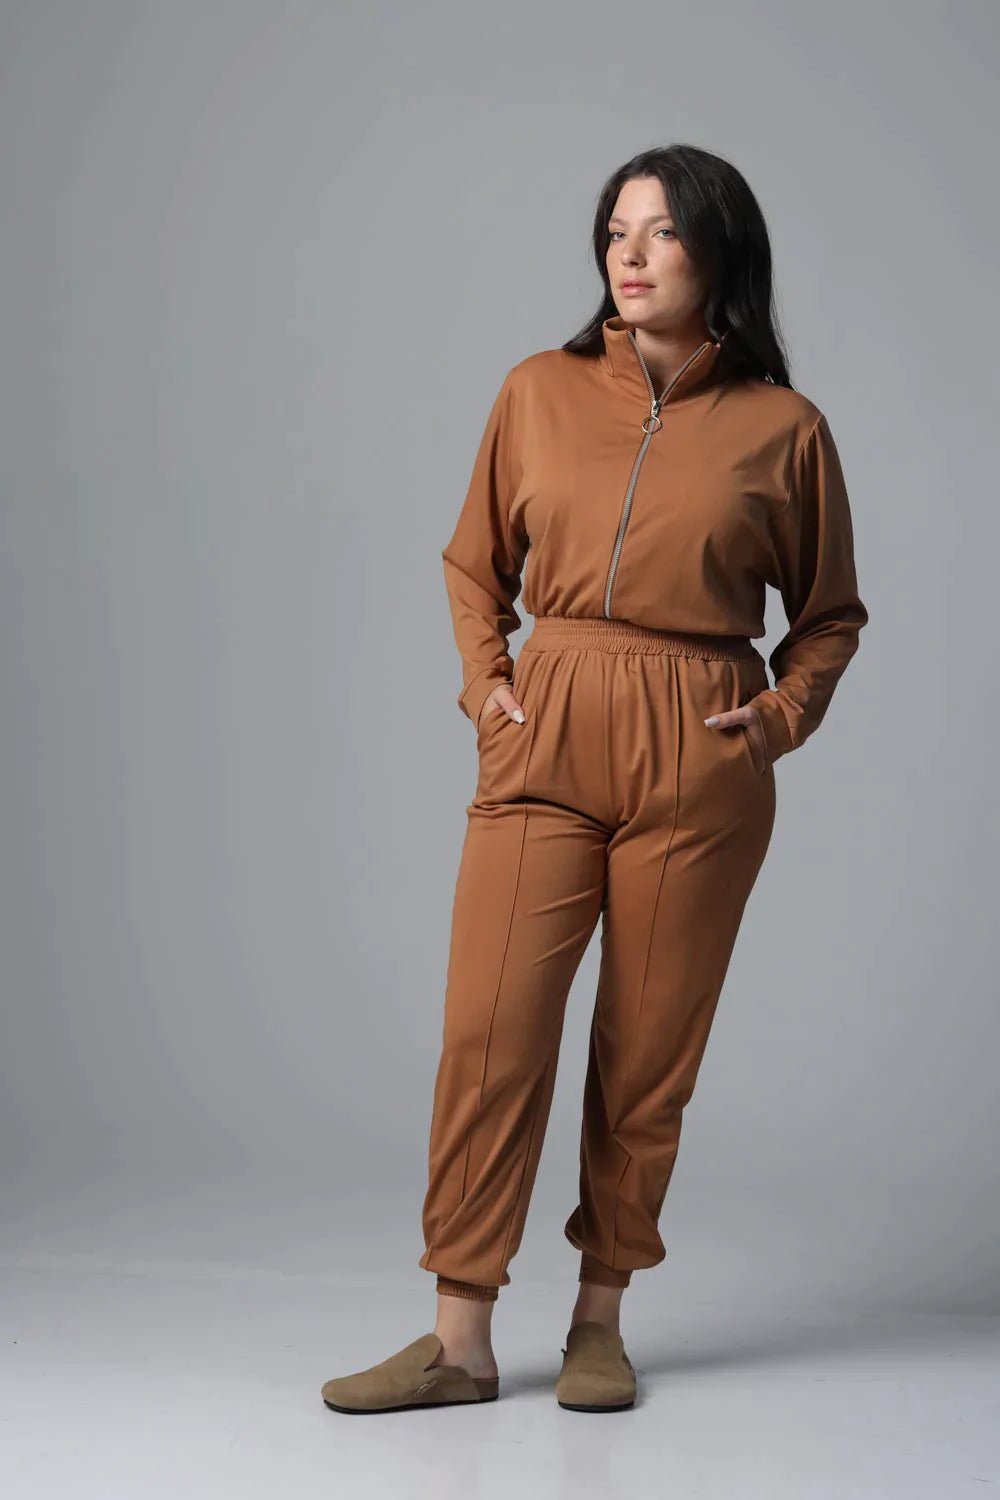 Eazy Green Jumpsuit